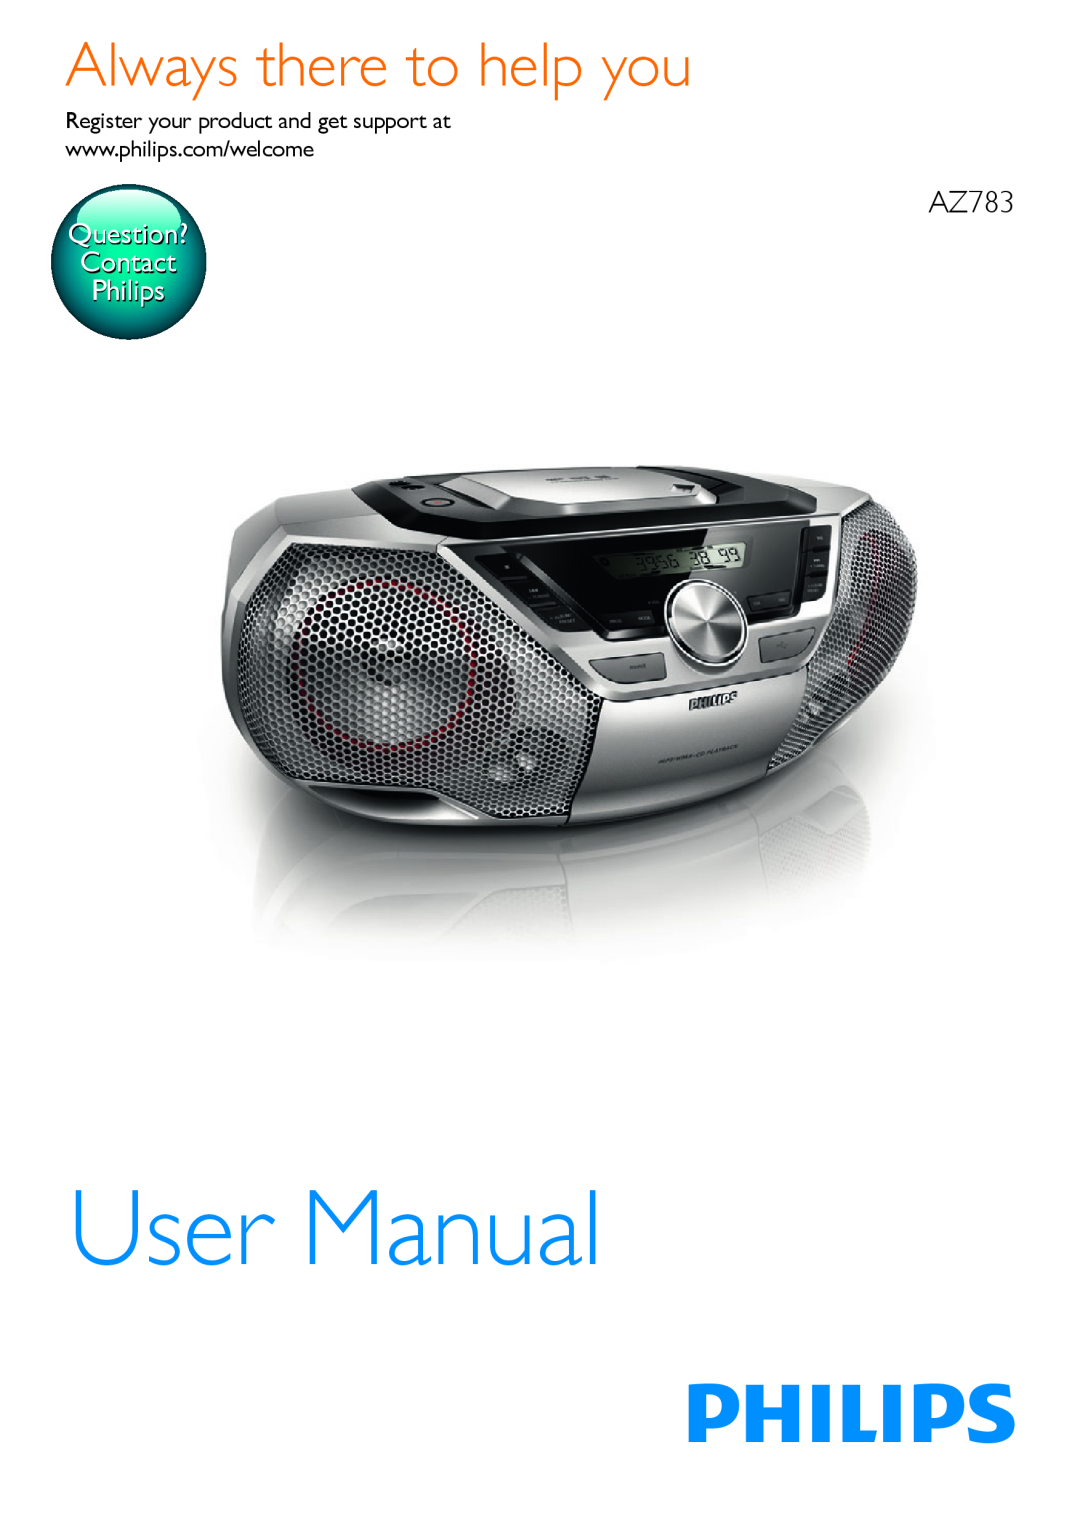 Philips AZ783 user manual User Manual, Always there to help you, Question? Contact Philips 